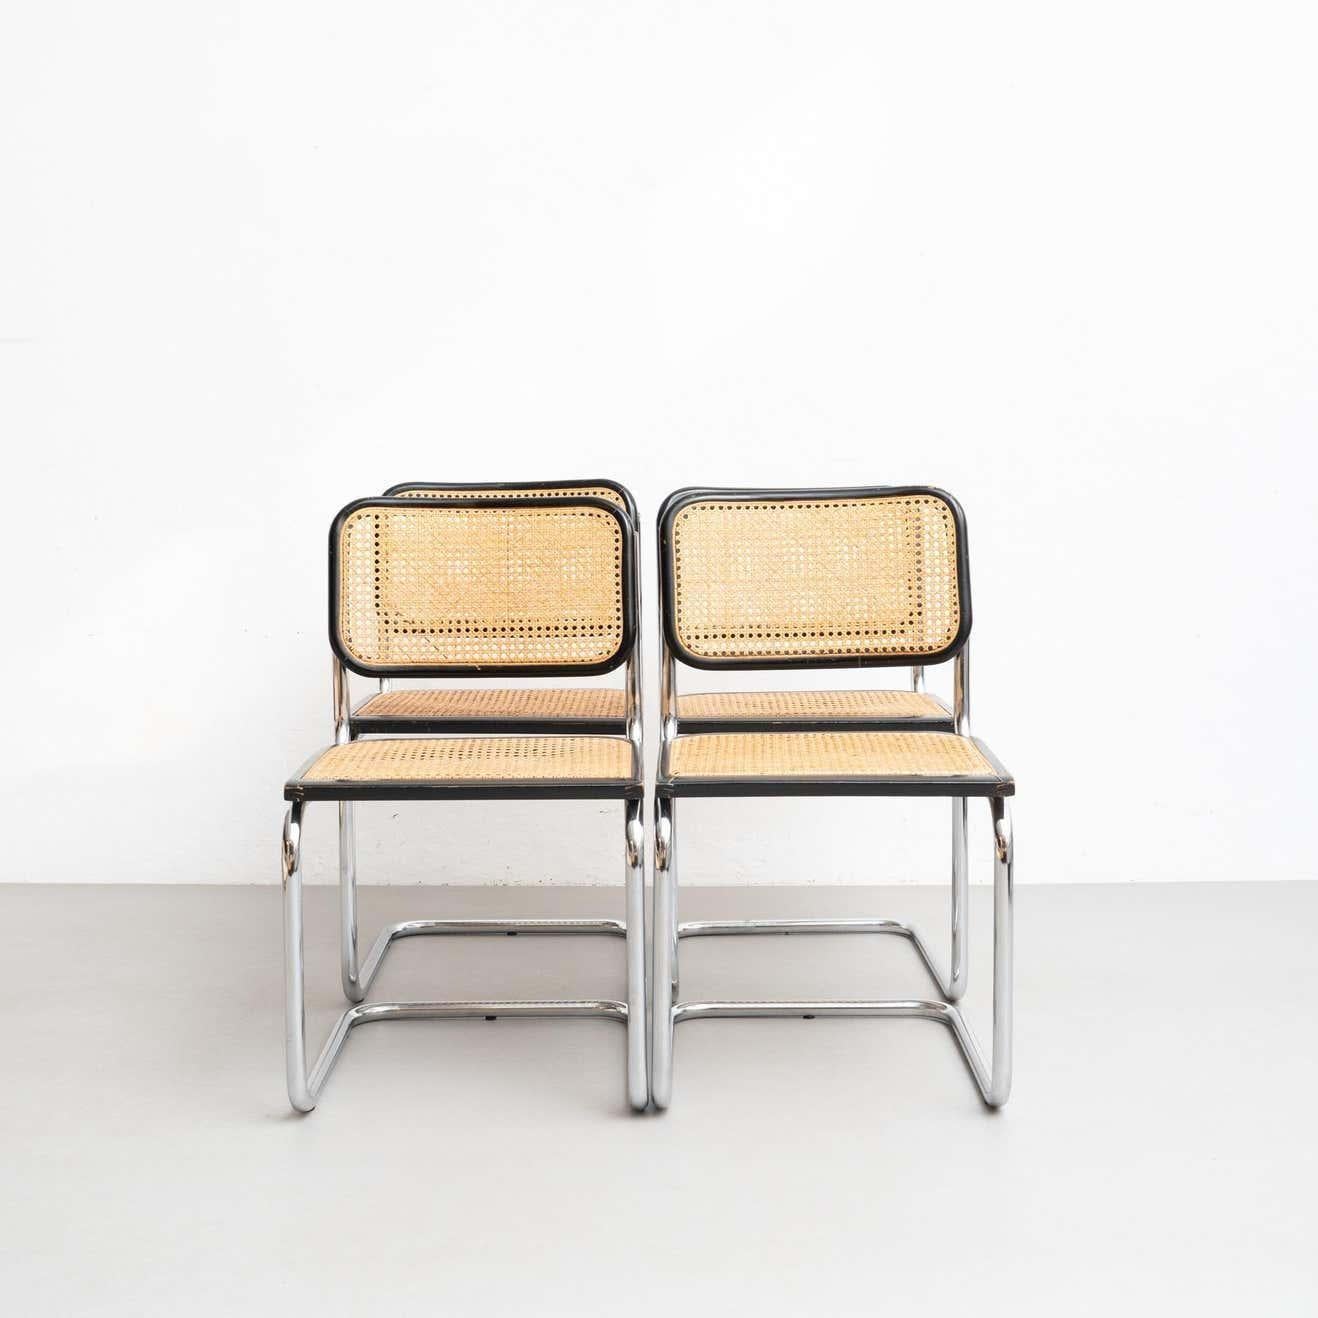 Set of 4 Marcel Breuer Cesca Metal and Wood Mid-Century Modern Chairs, c 1960 For Sale 6